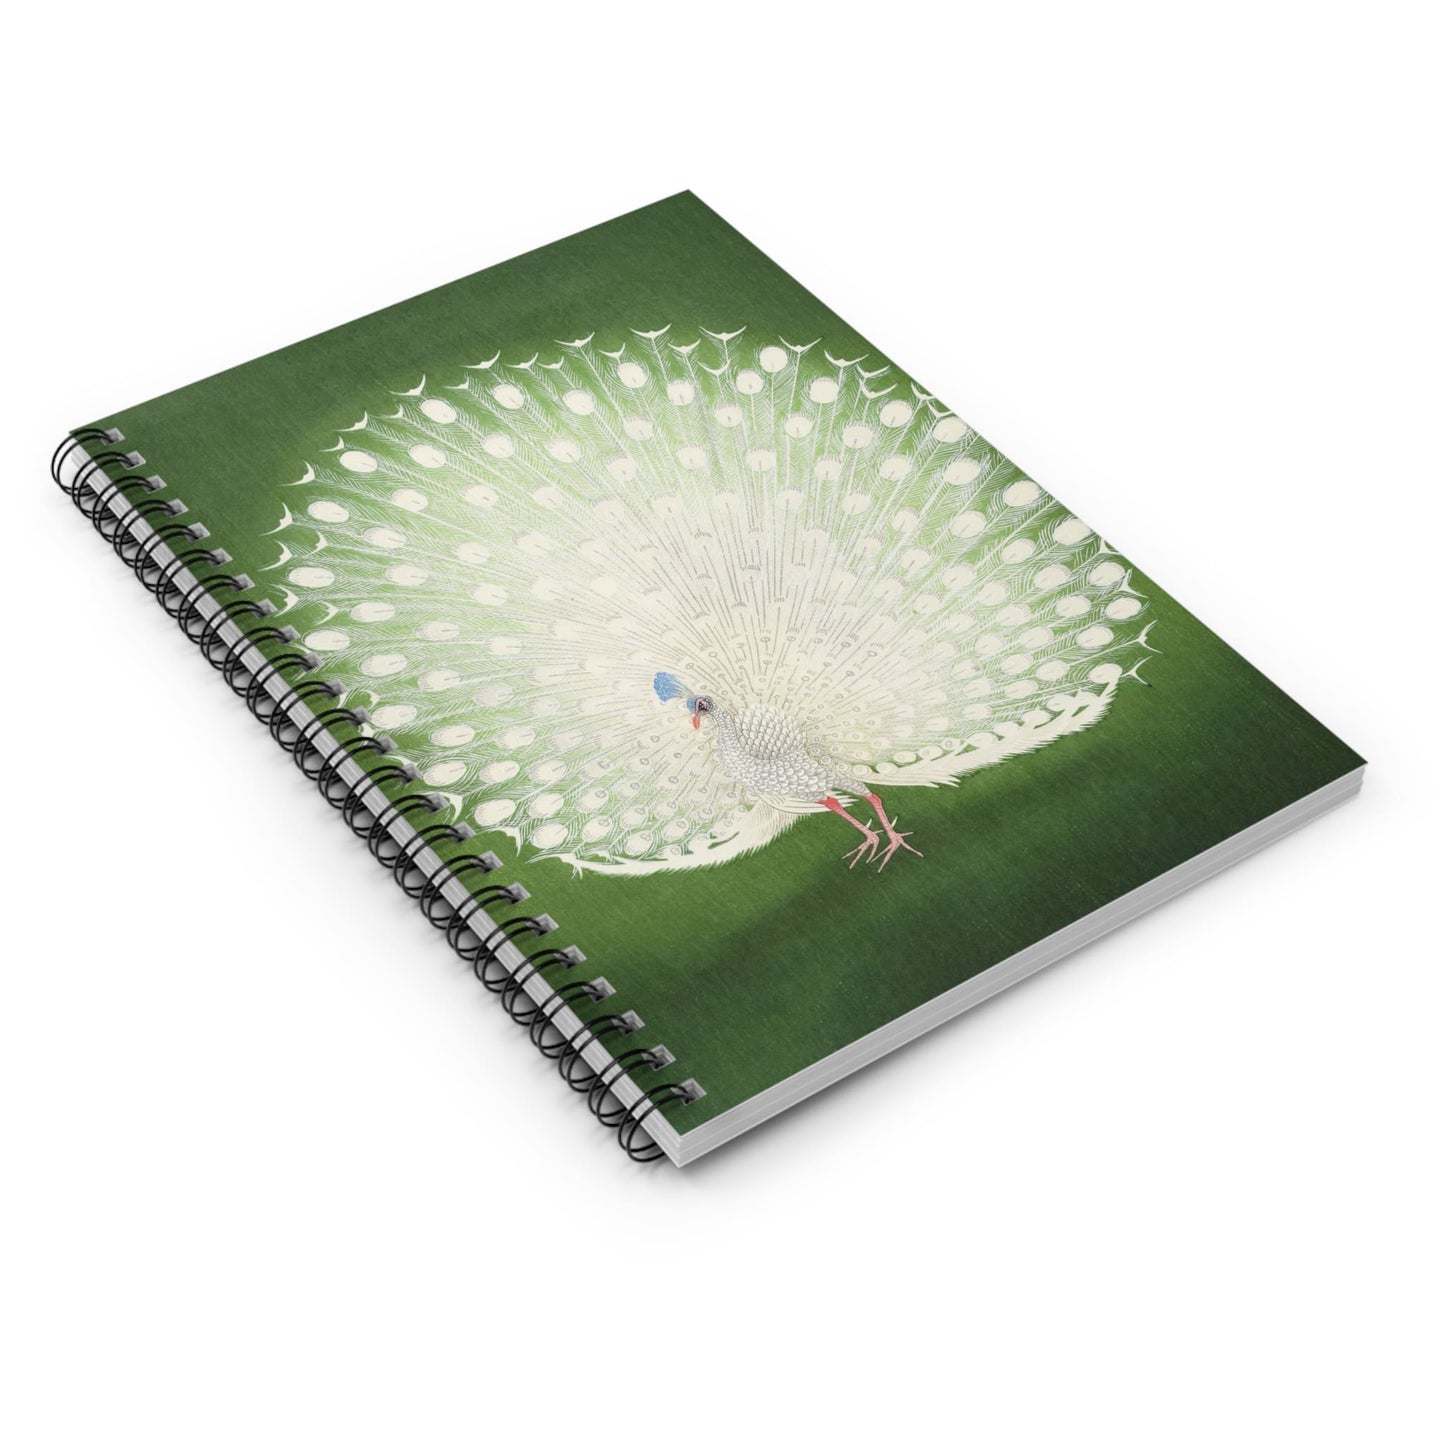 Peacock Feathers Spiral Notebook Laying Flat on White Surface